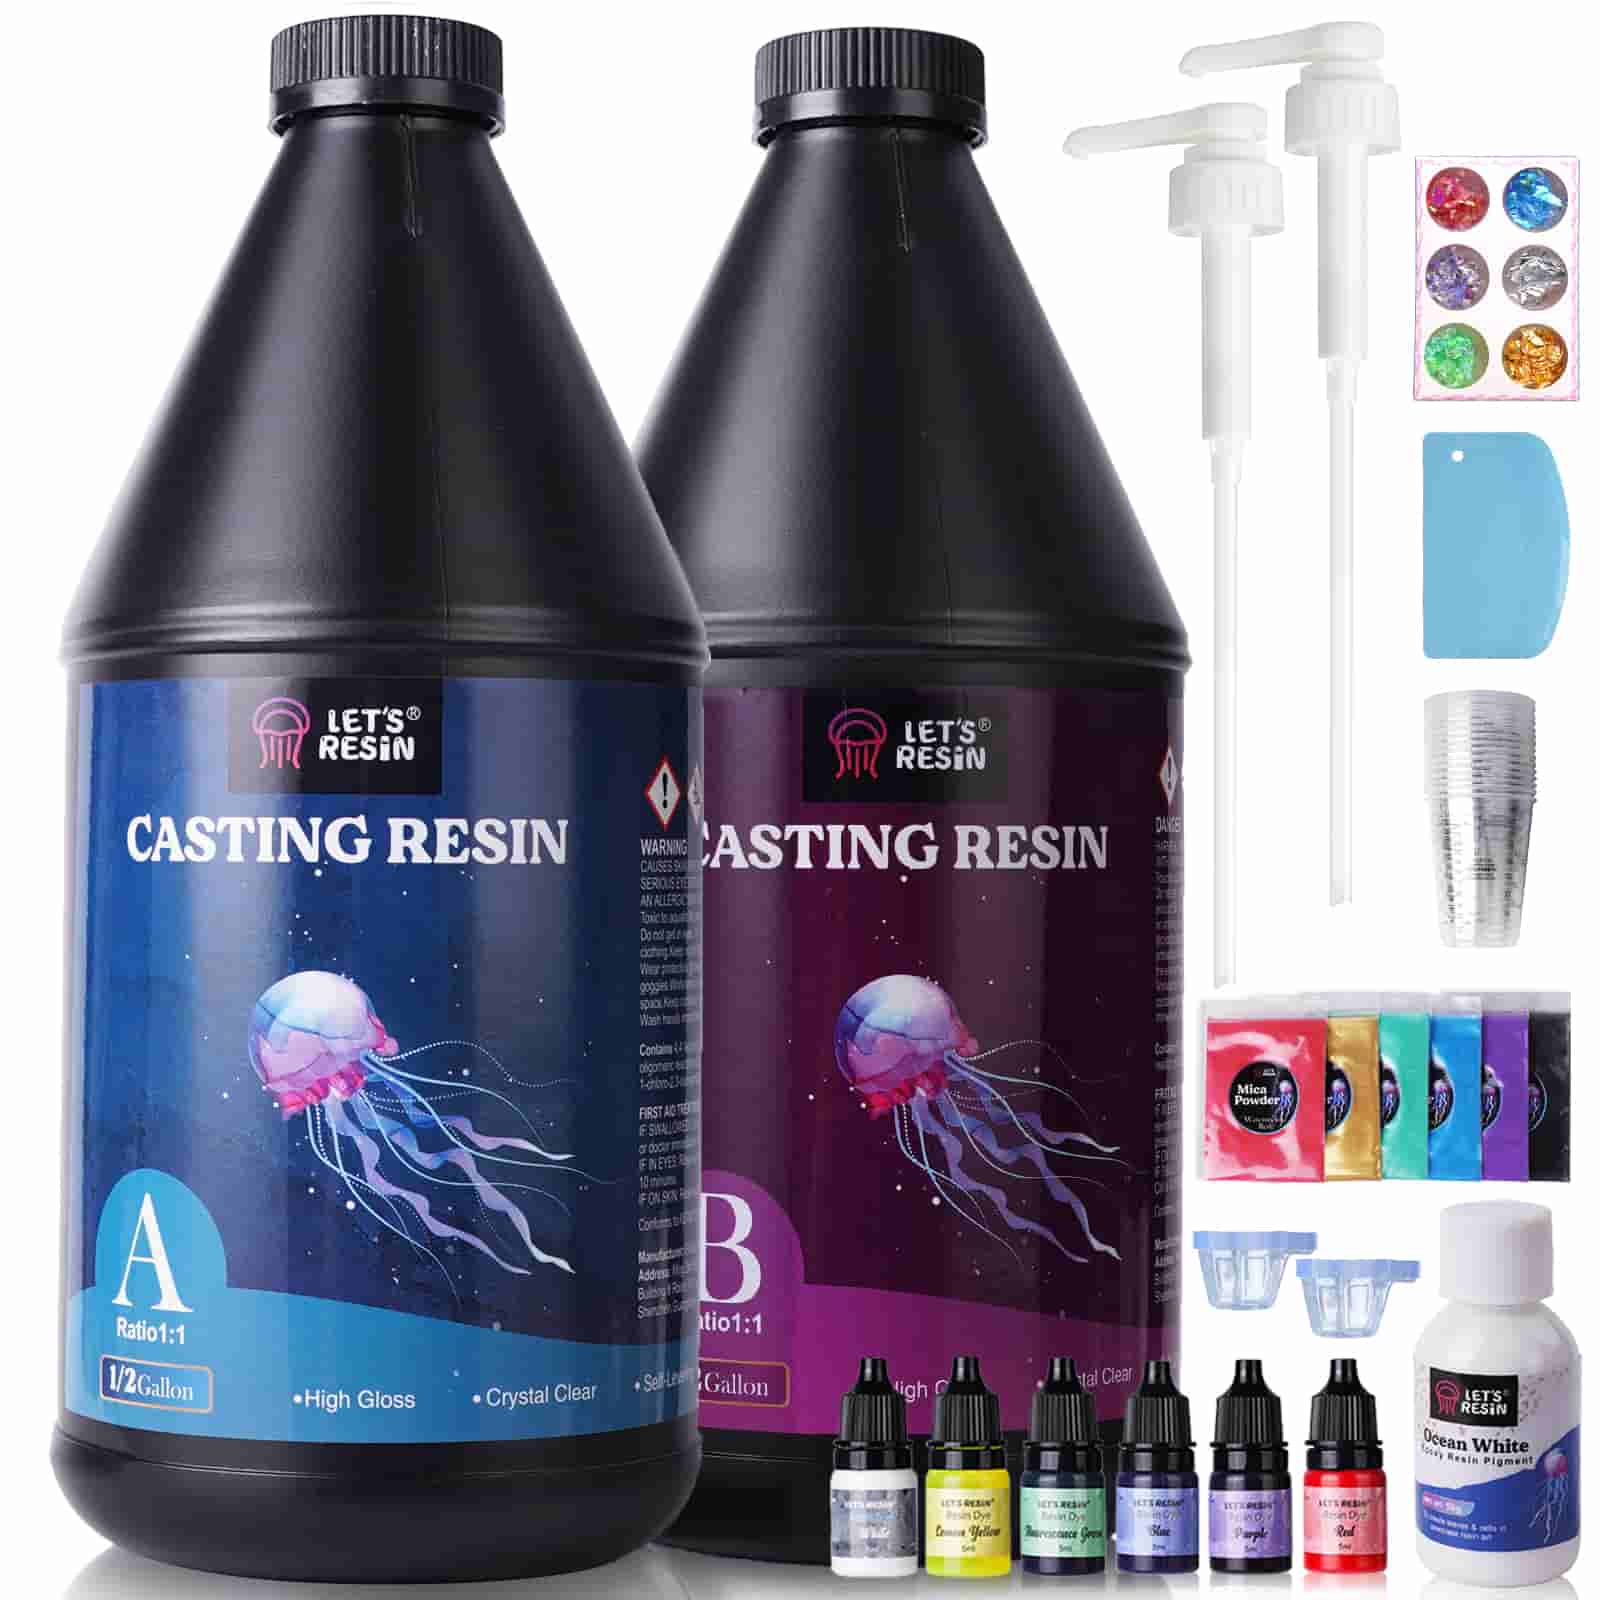 Craft Resin 1 Gallon Epoxy Resin Kit - Crystal Clear Epoxy Resin Kit &  Hardener for DIY Art, Mold Casting, Jewelry Making, Coasters, Table Top